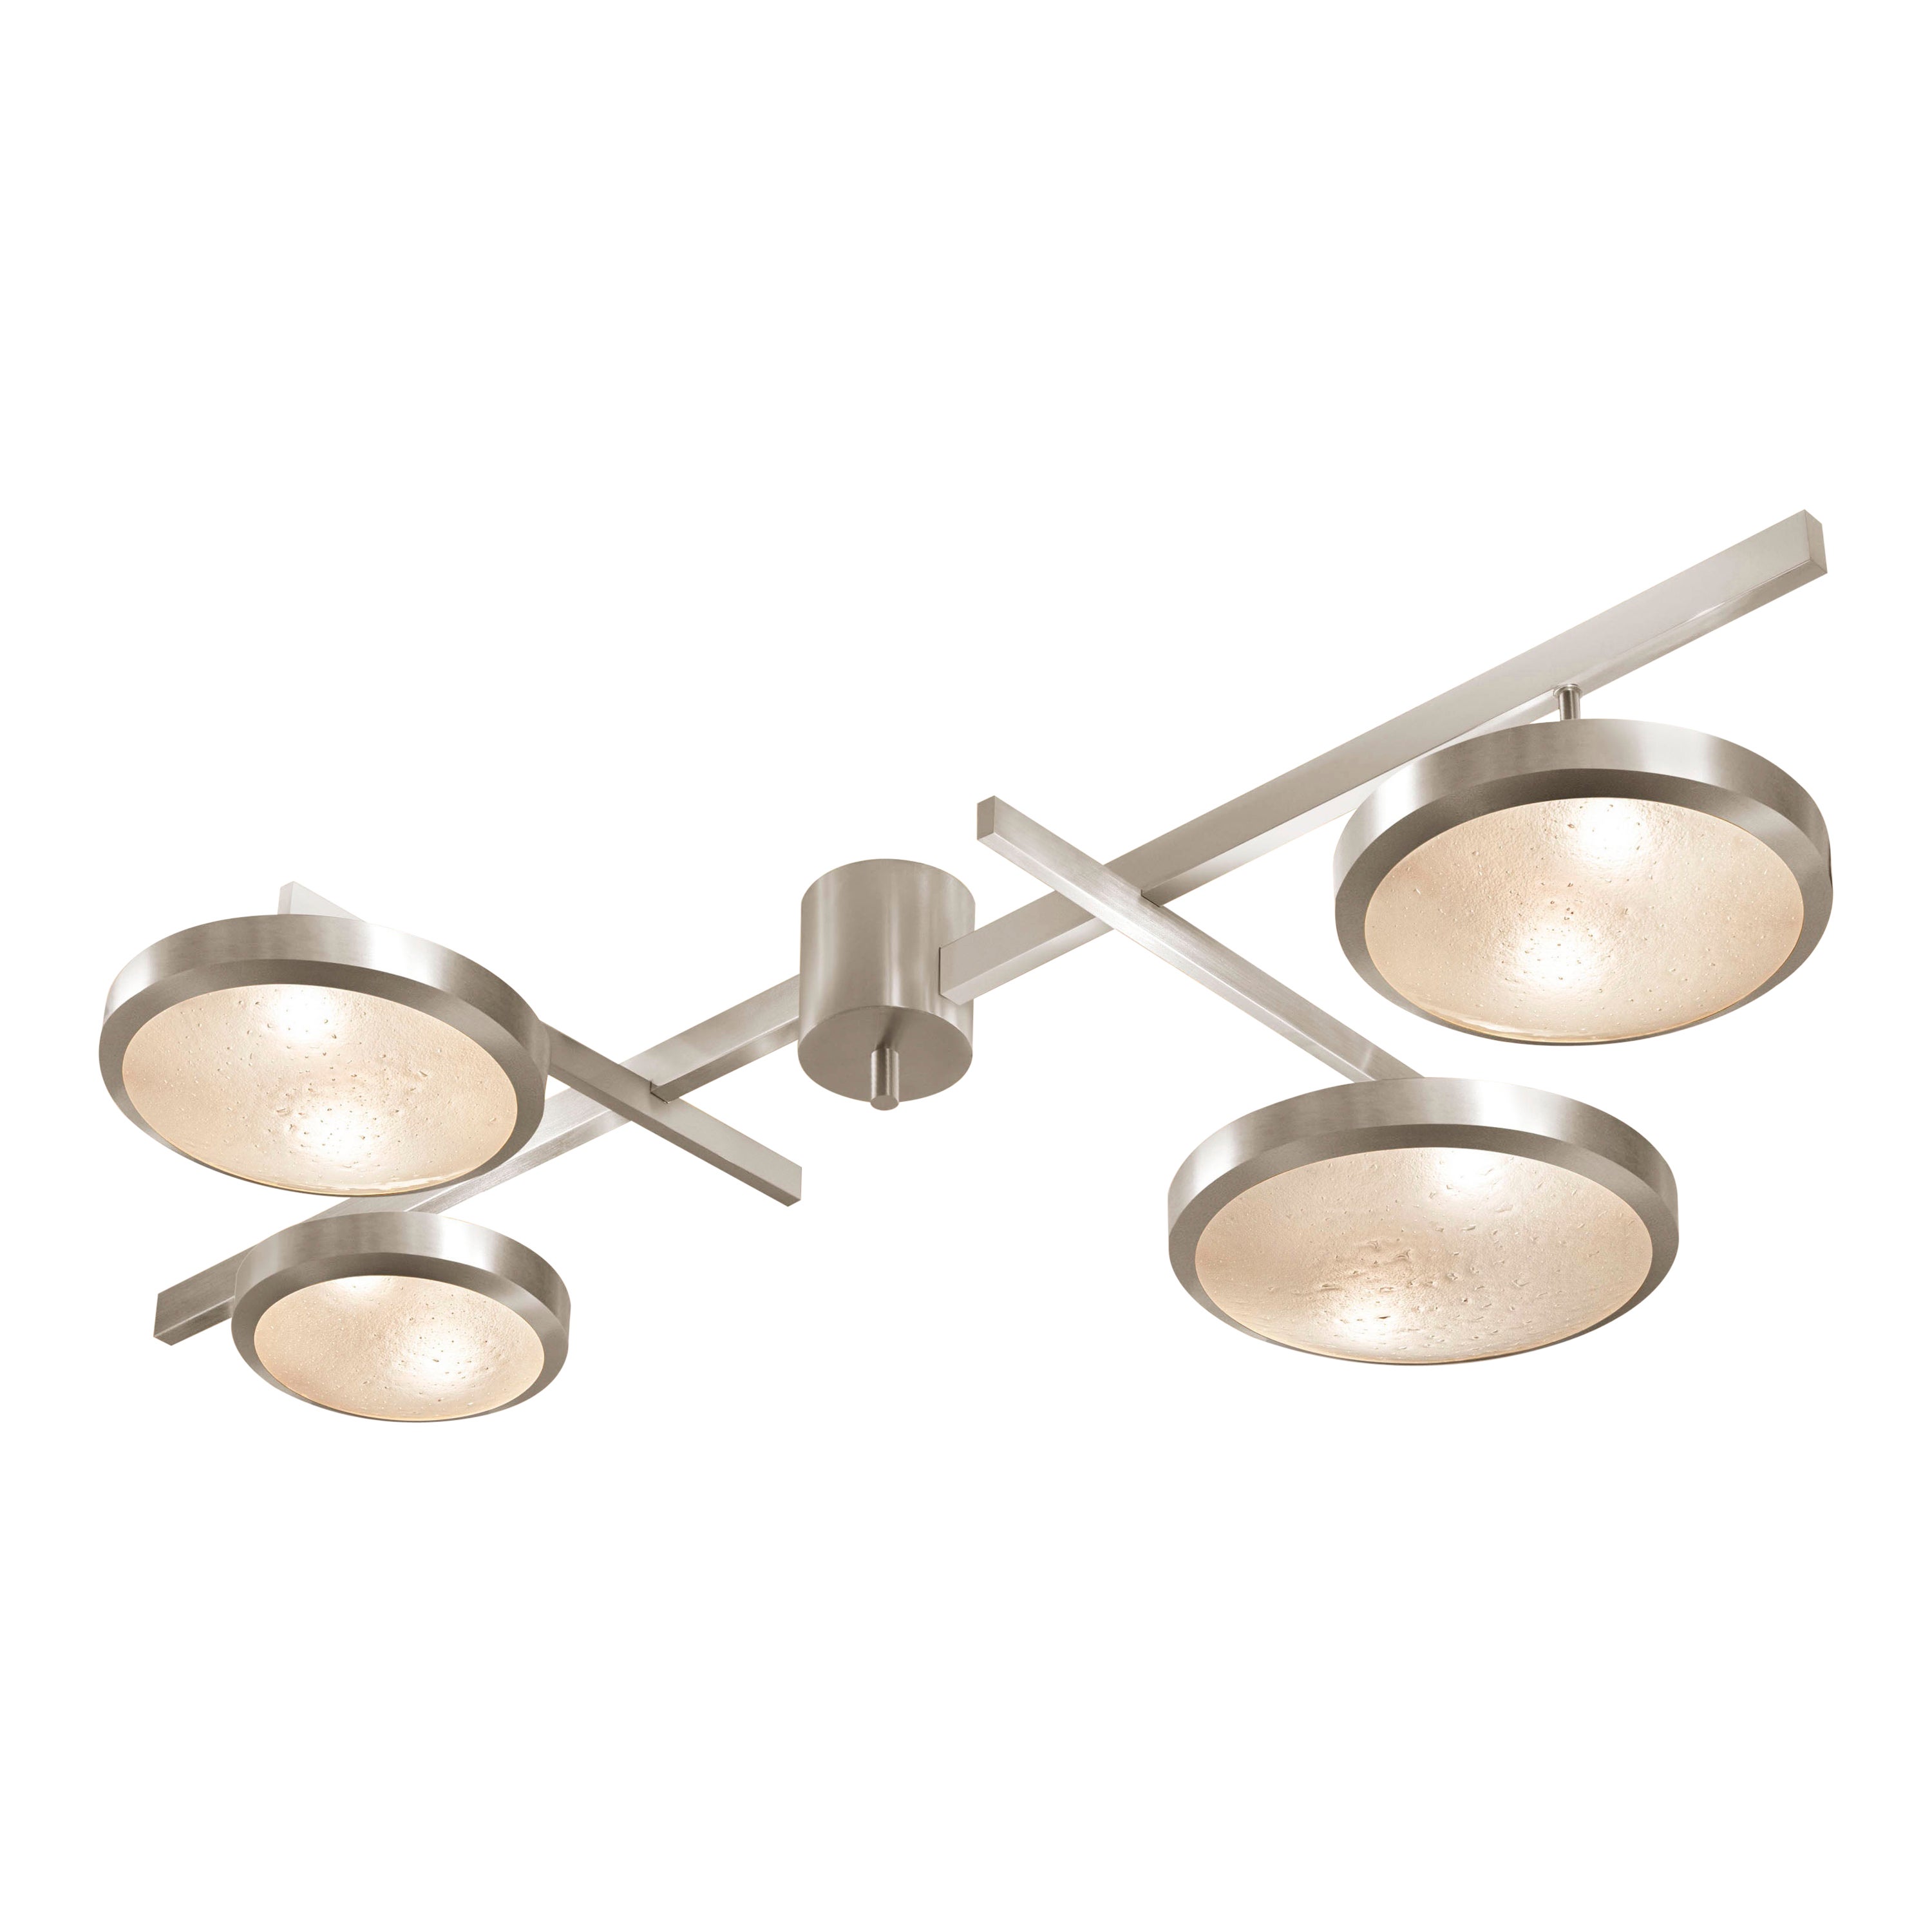 Tetrix Ceiling Light by Gaspare Asaro- Satin Nickel Finish For Sale